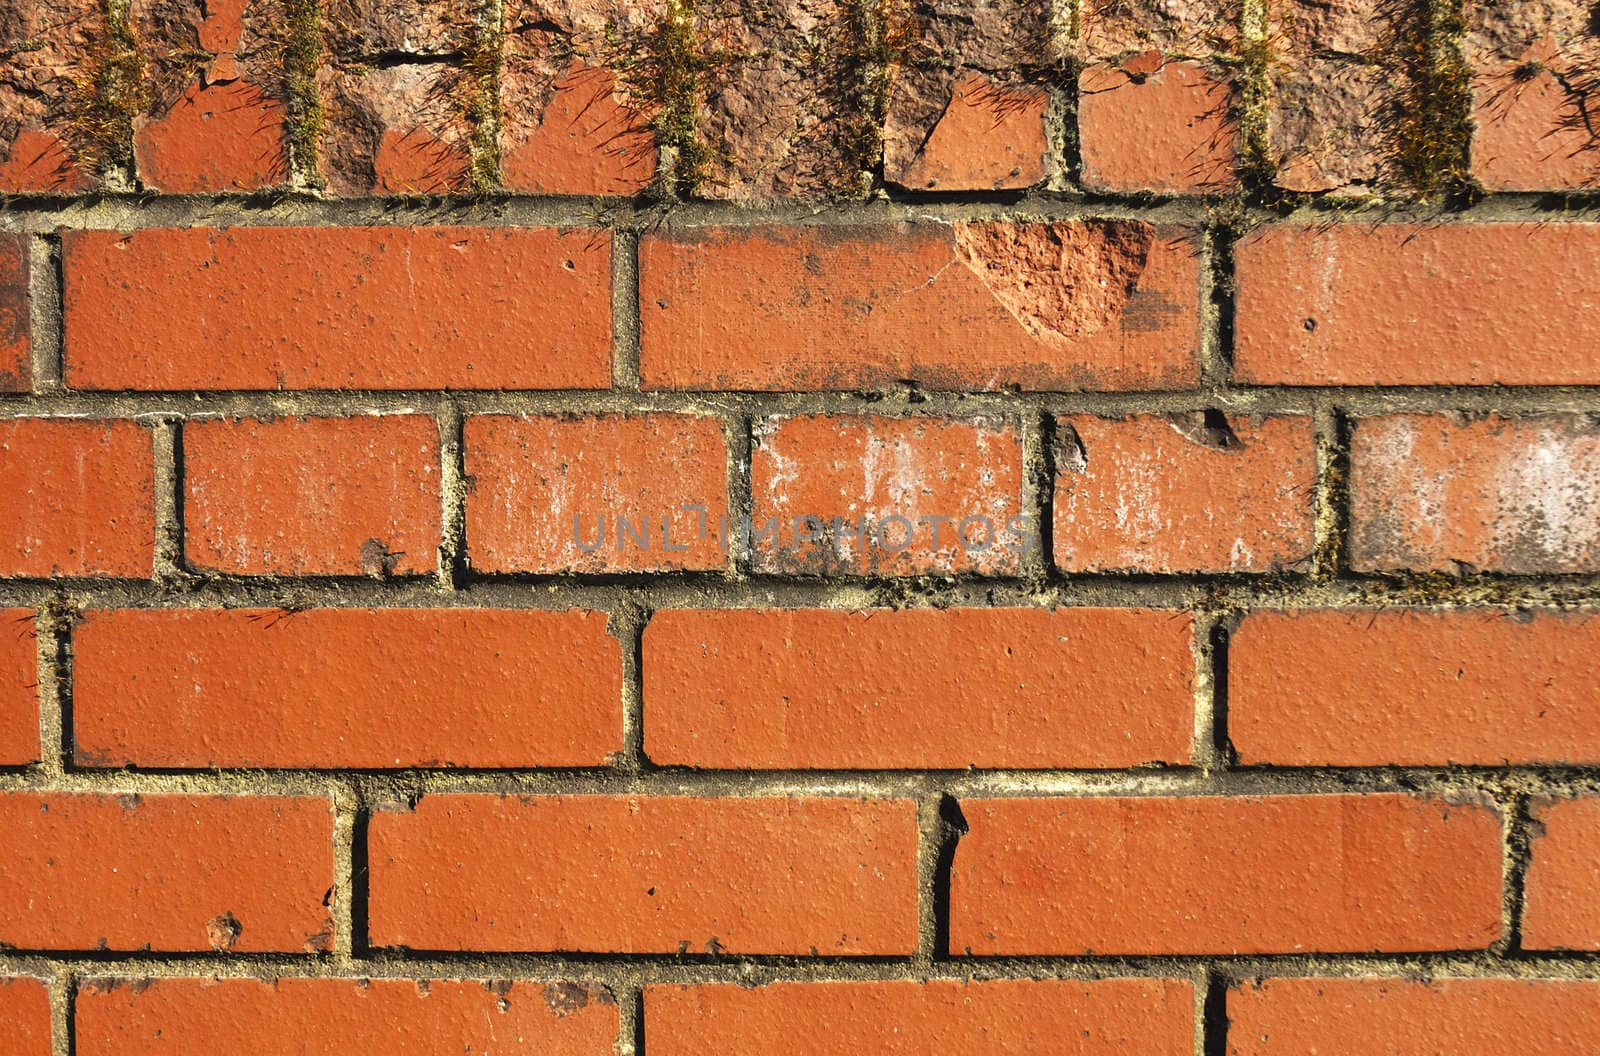 A brick wall, slightly stained and chipped. Suitable as graphic background.